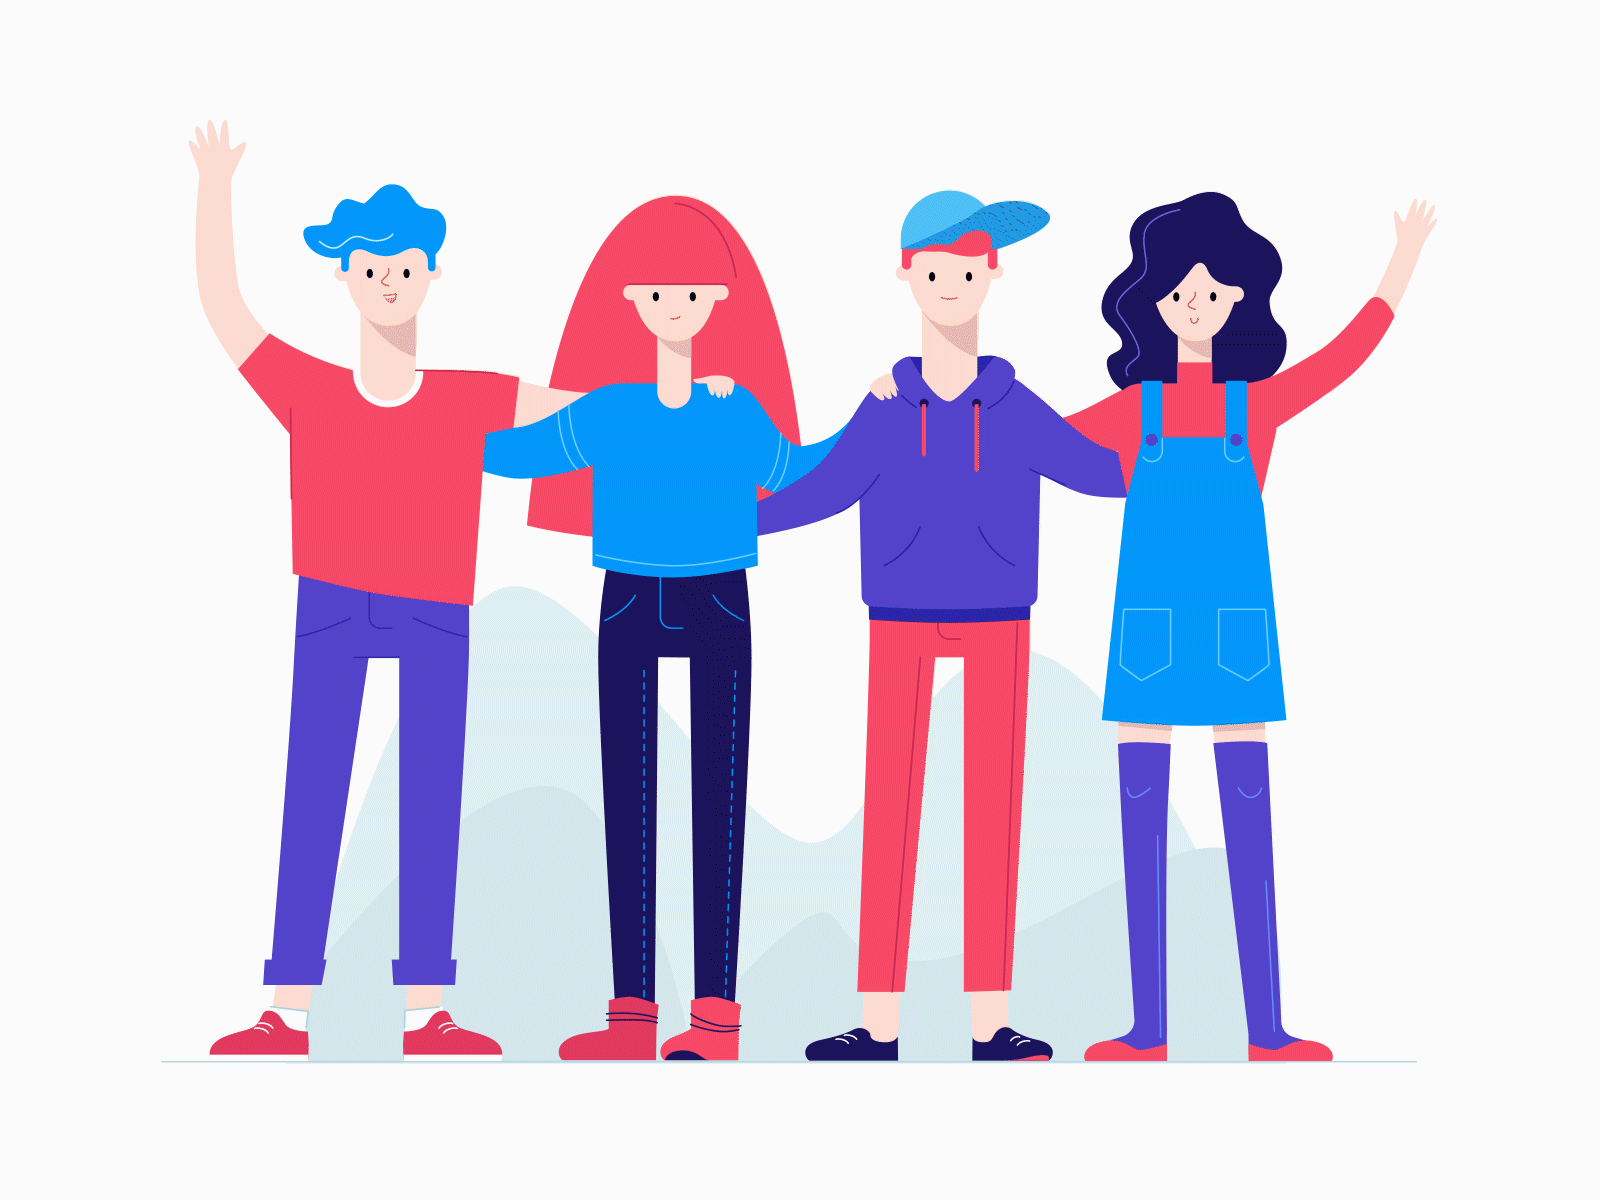 Team by Natali Astrowska on Dribbble